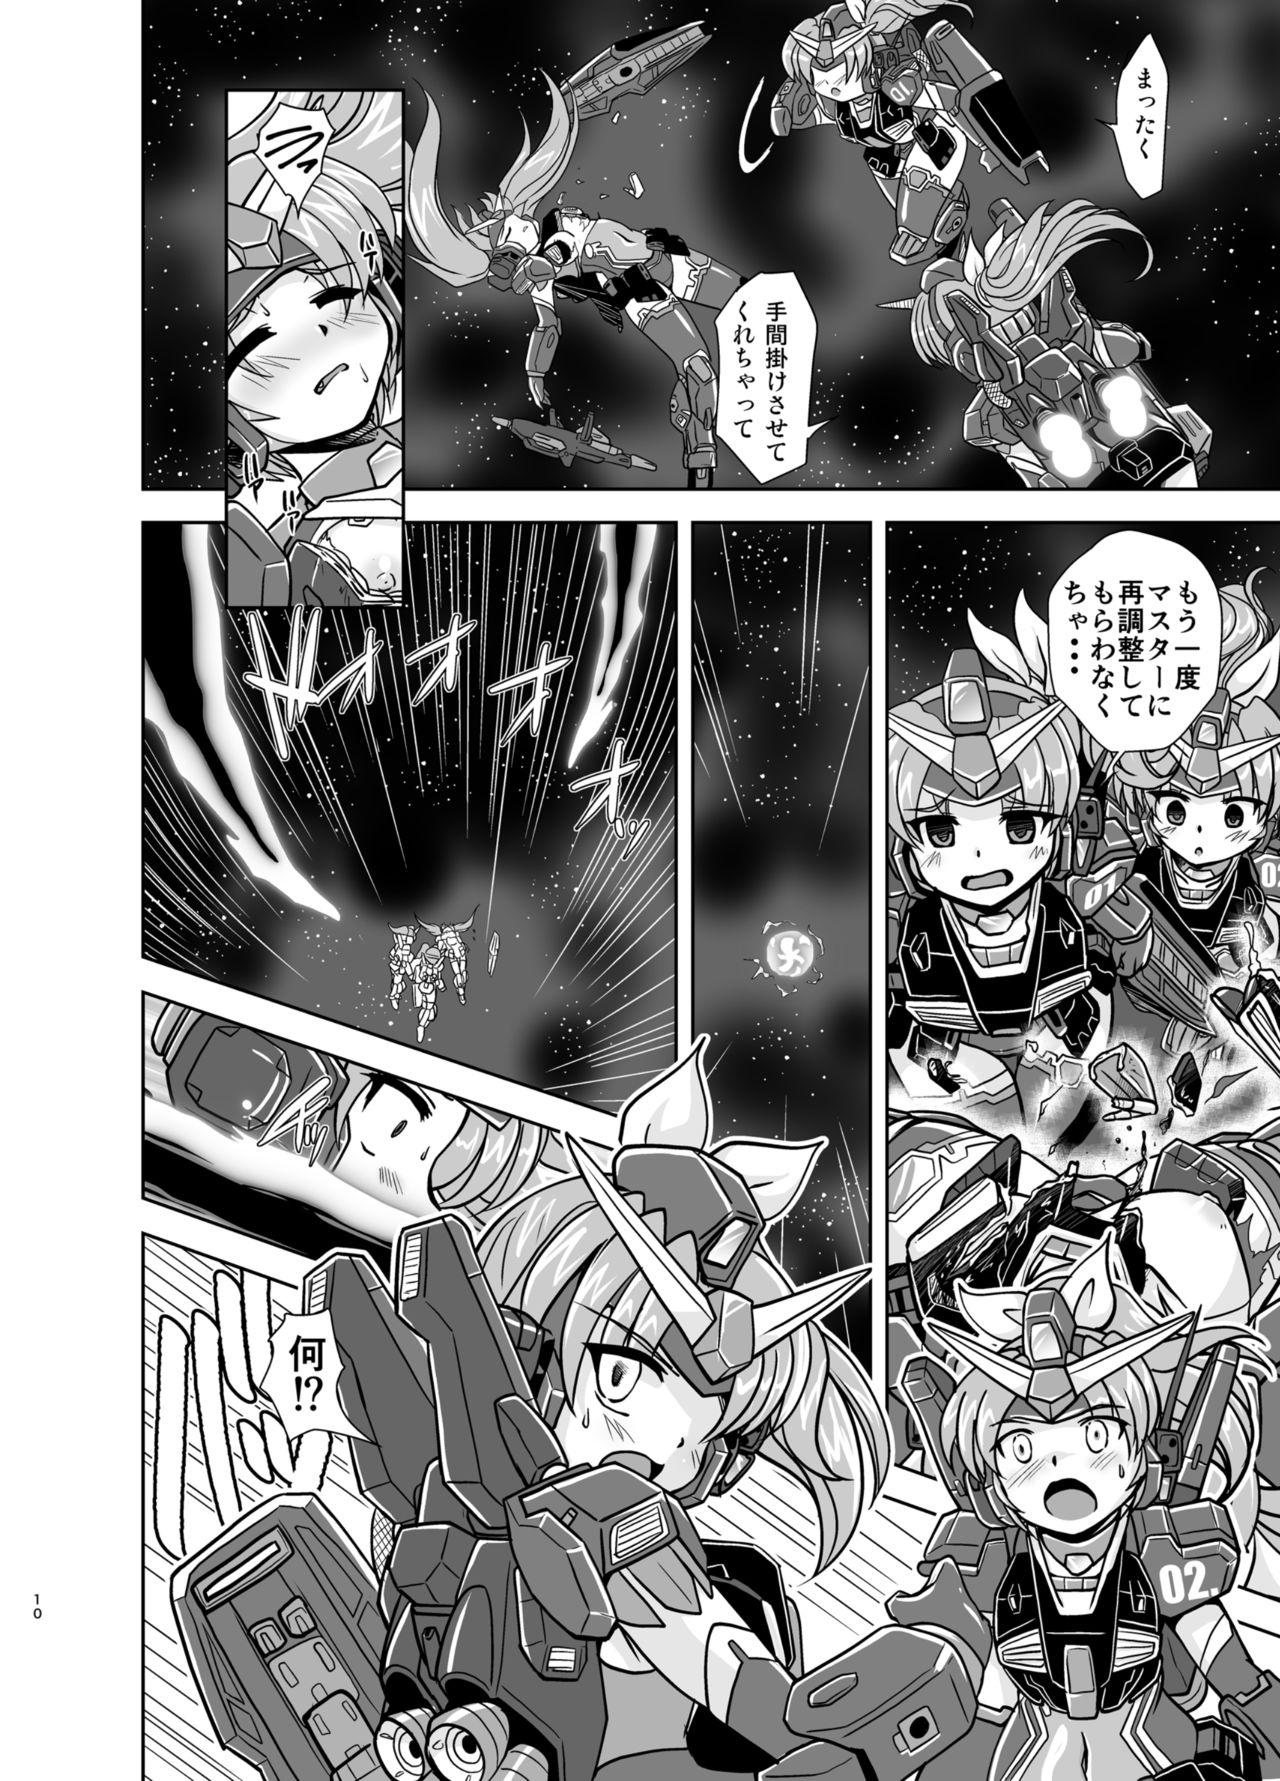 Officesex GH - Mobile suit gundam Hot Wife - Page 10